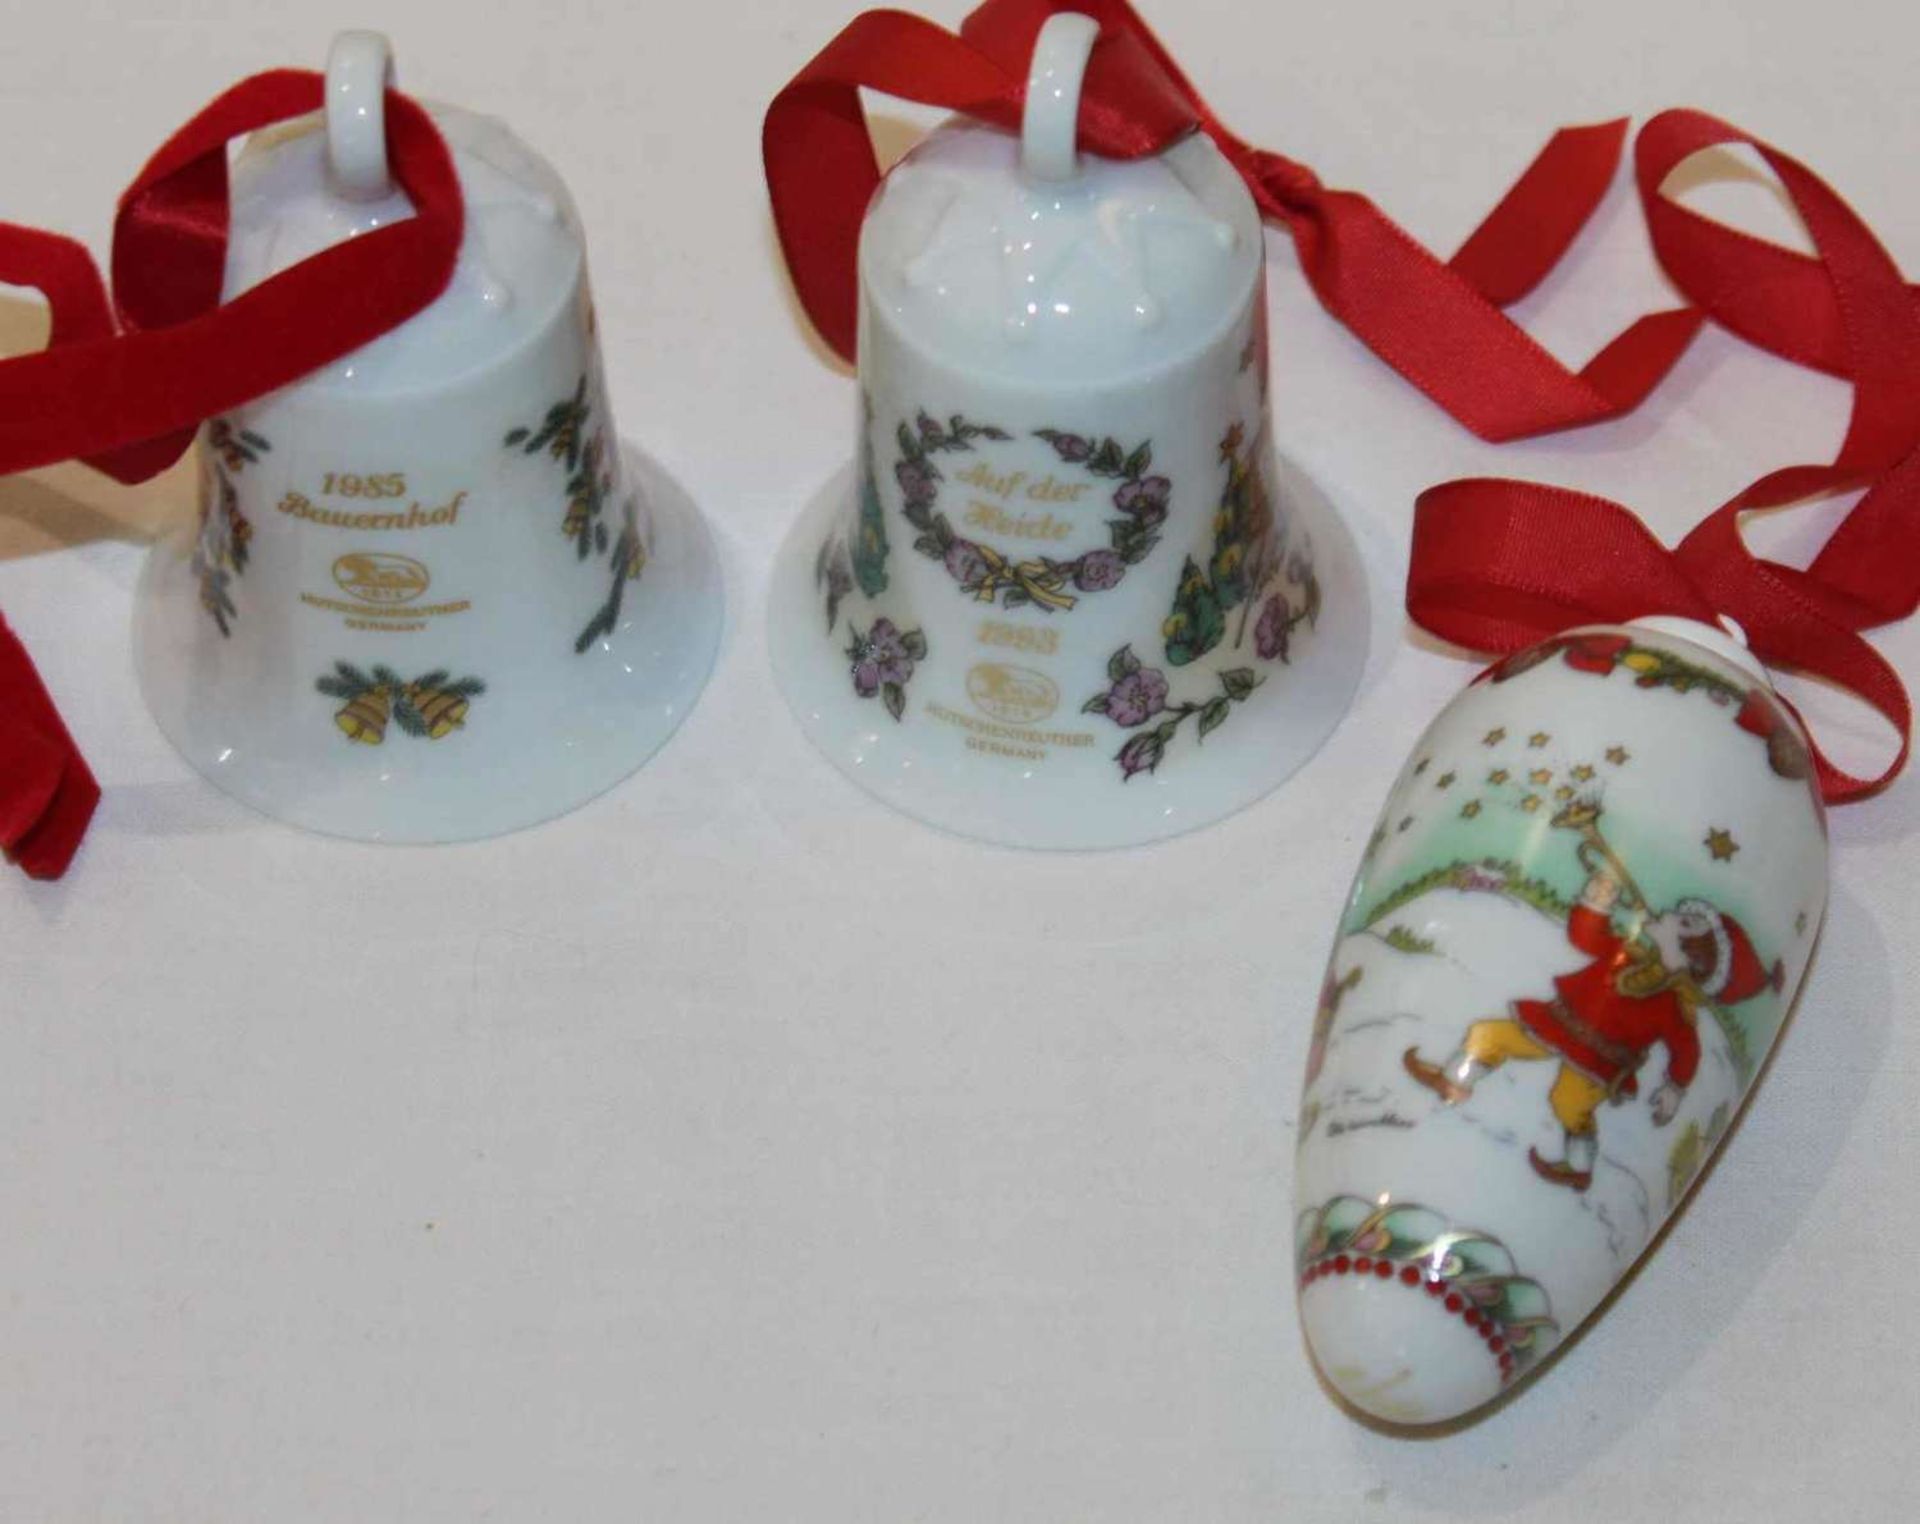 2 Hutschenreuther Christmas bells, as 1985, 1993 and 1 Hutschenreuther pin